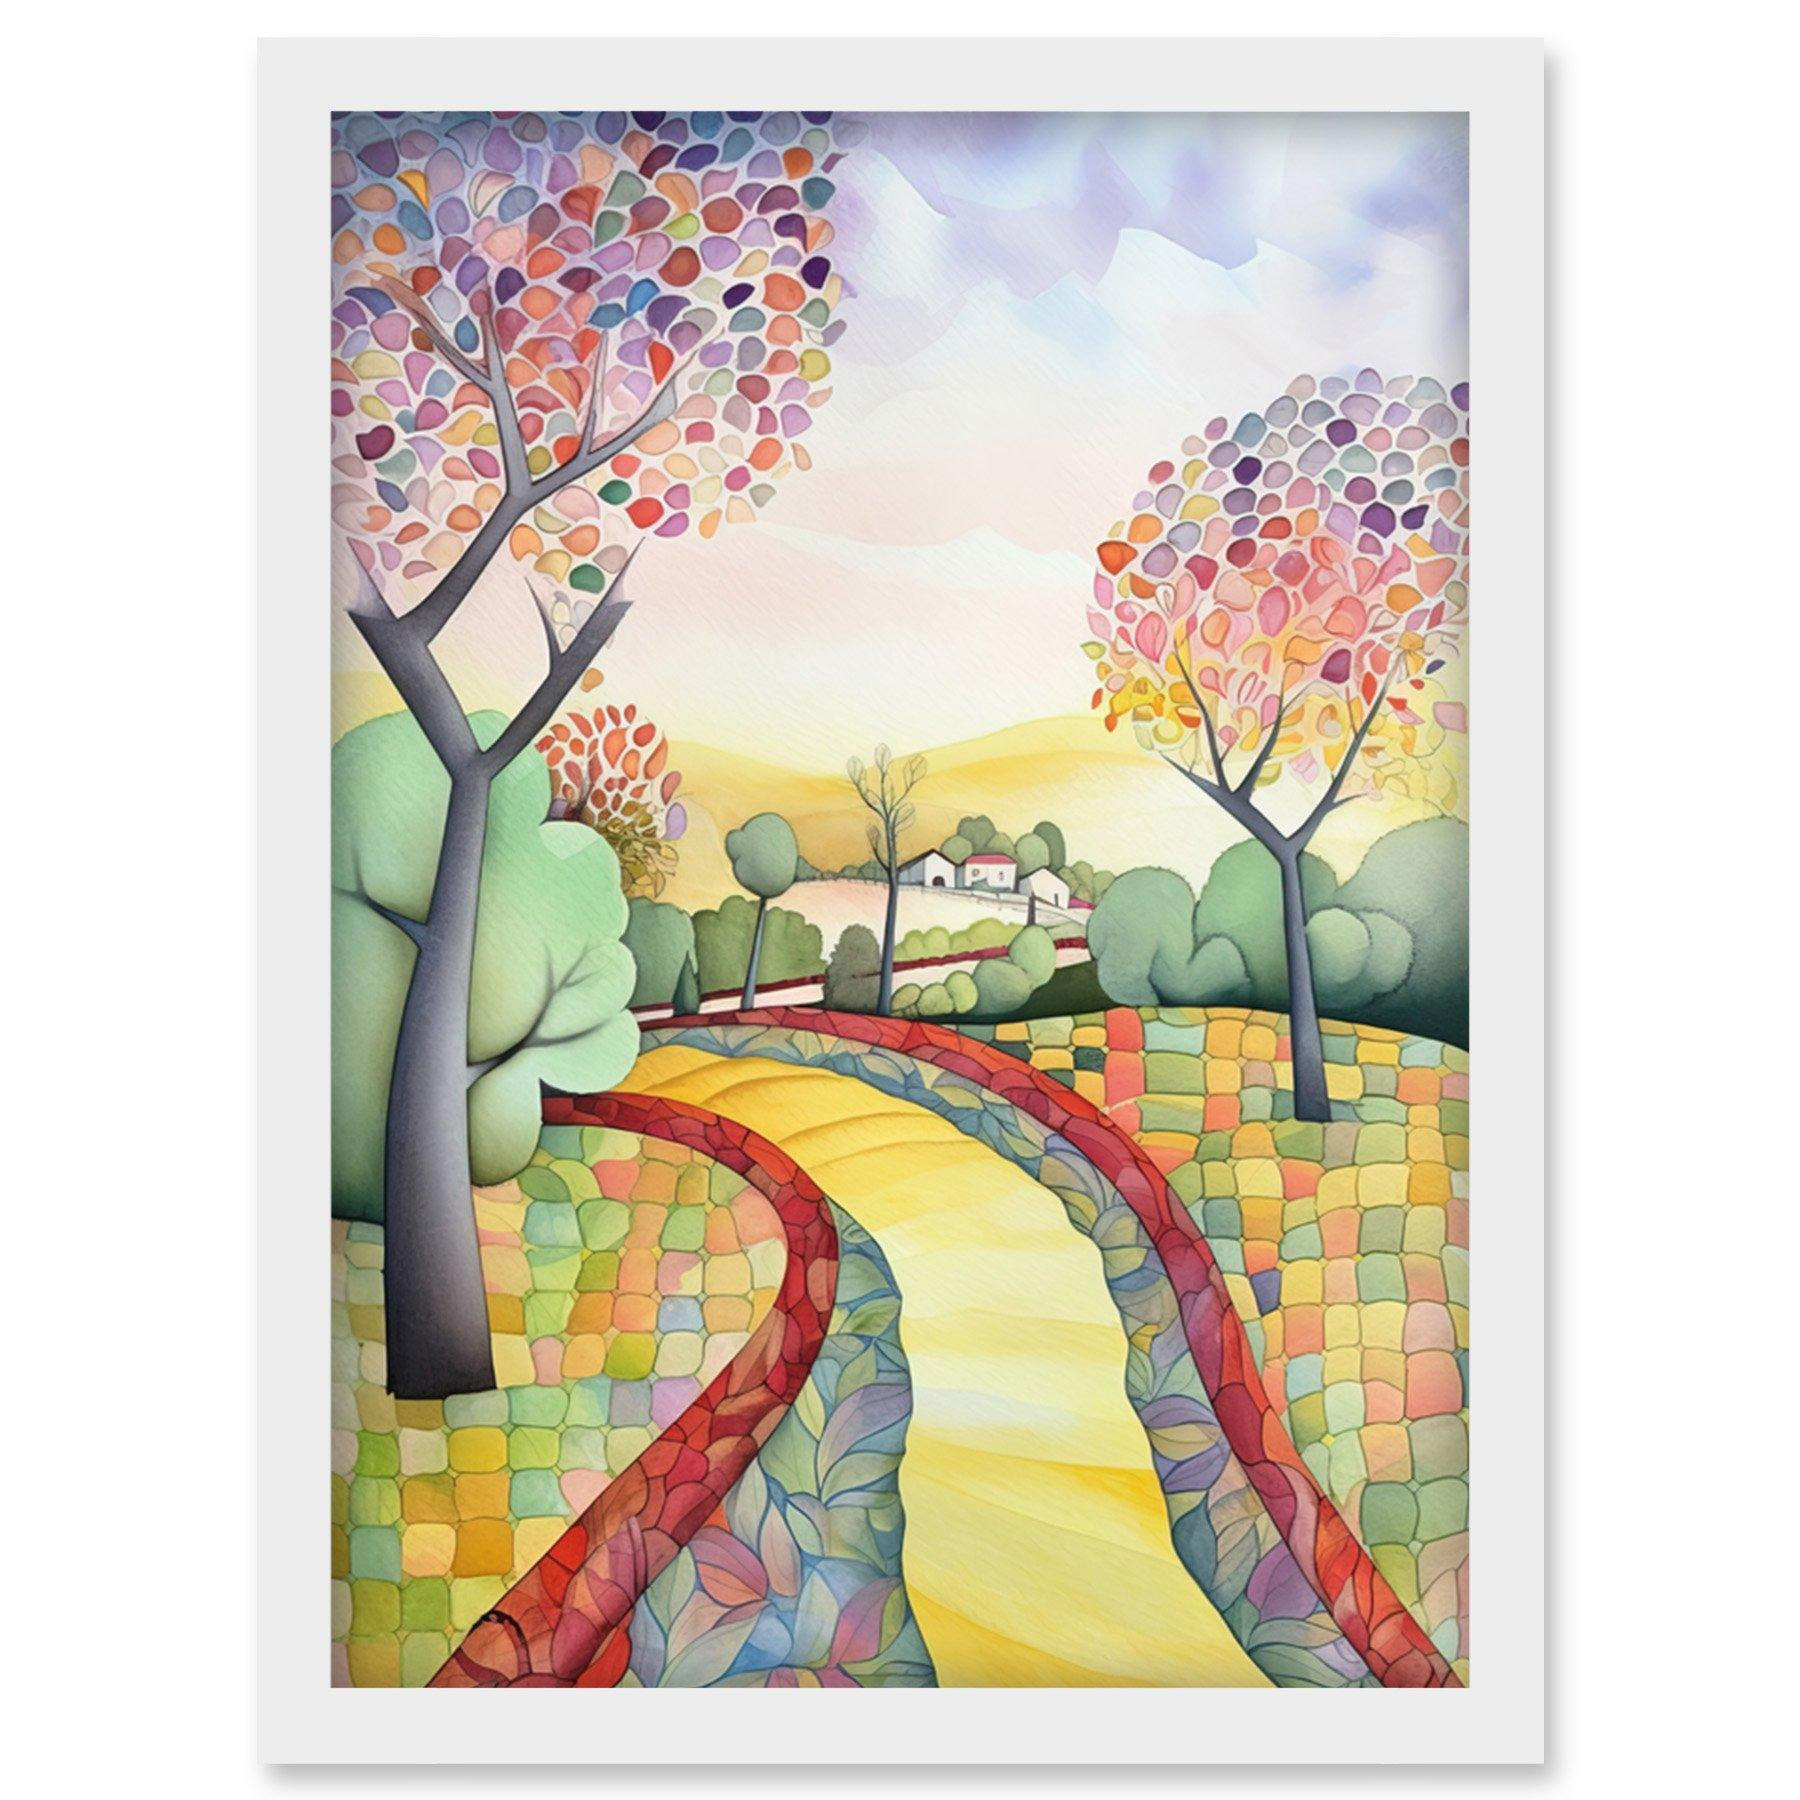 Countryside Path In Autumn Folk Art Landscape Pastel Watercolour Painting Artwork Framed Wall Art Print A4 - image 1